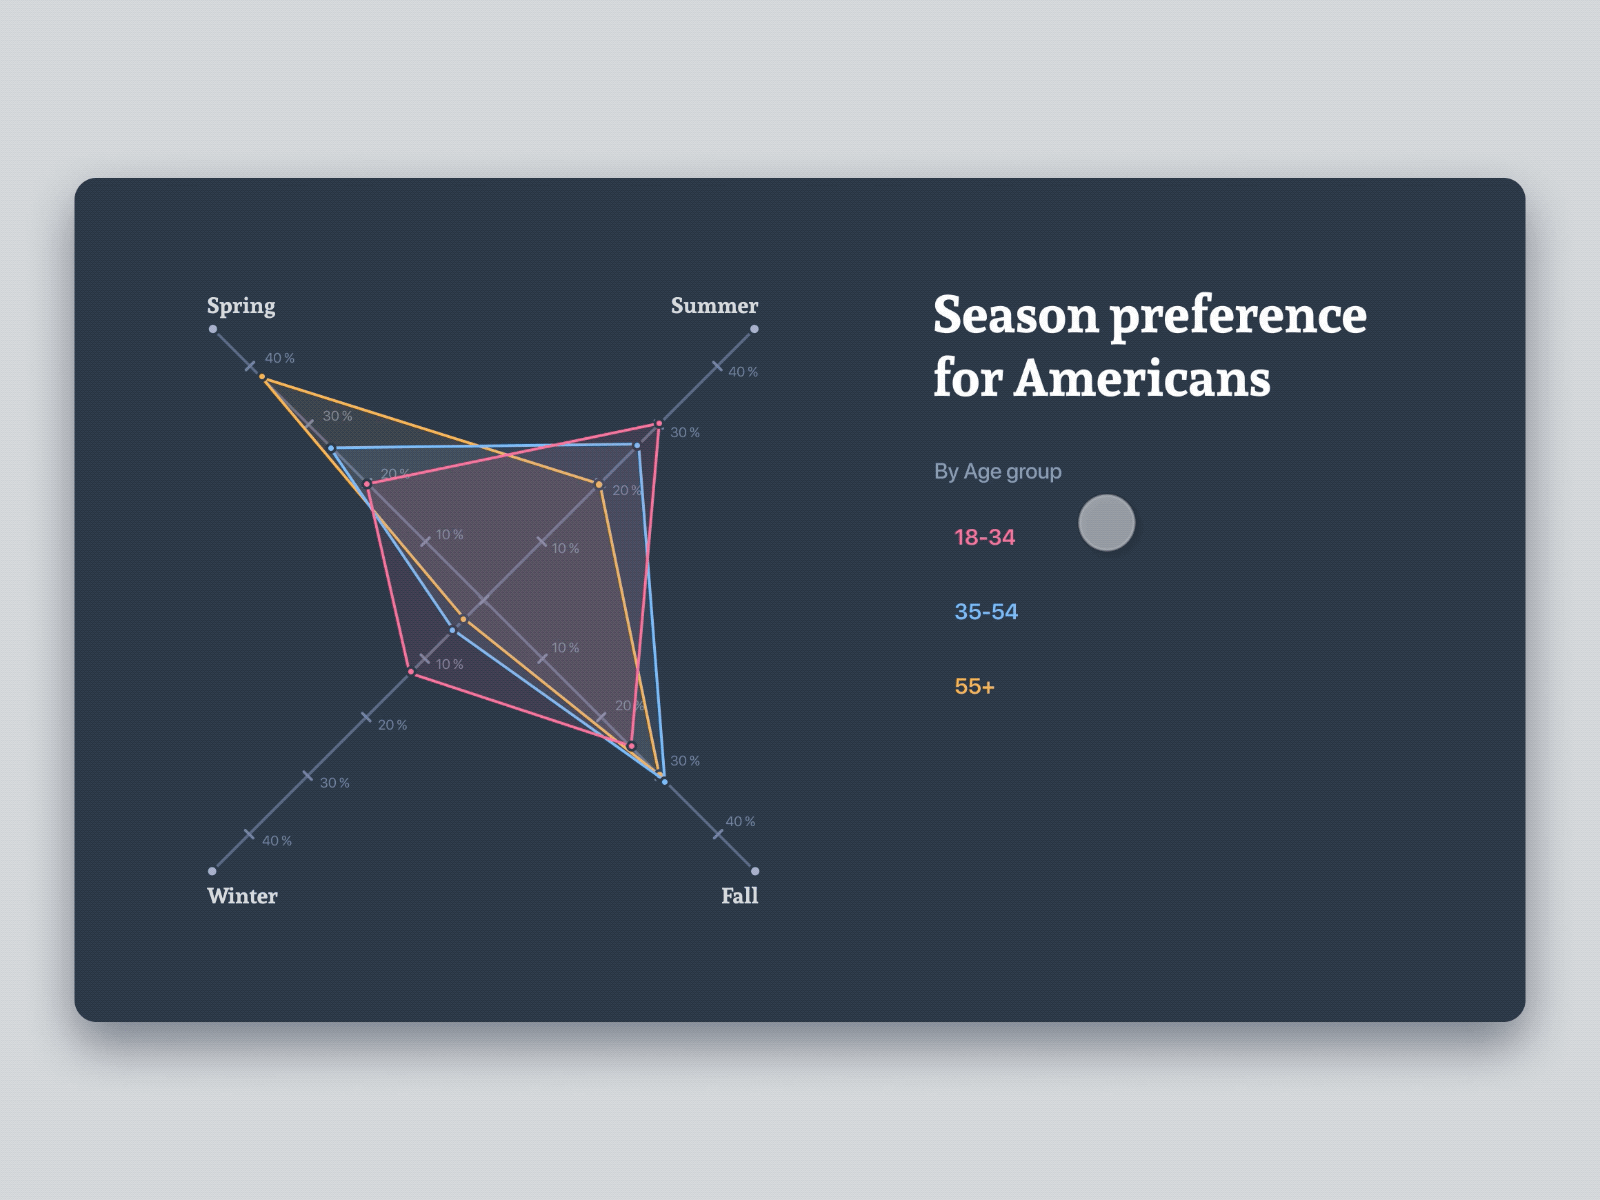 Season preference for Americans